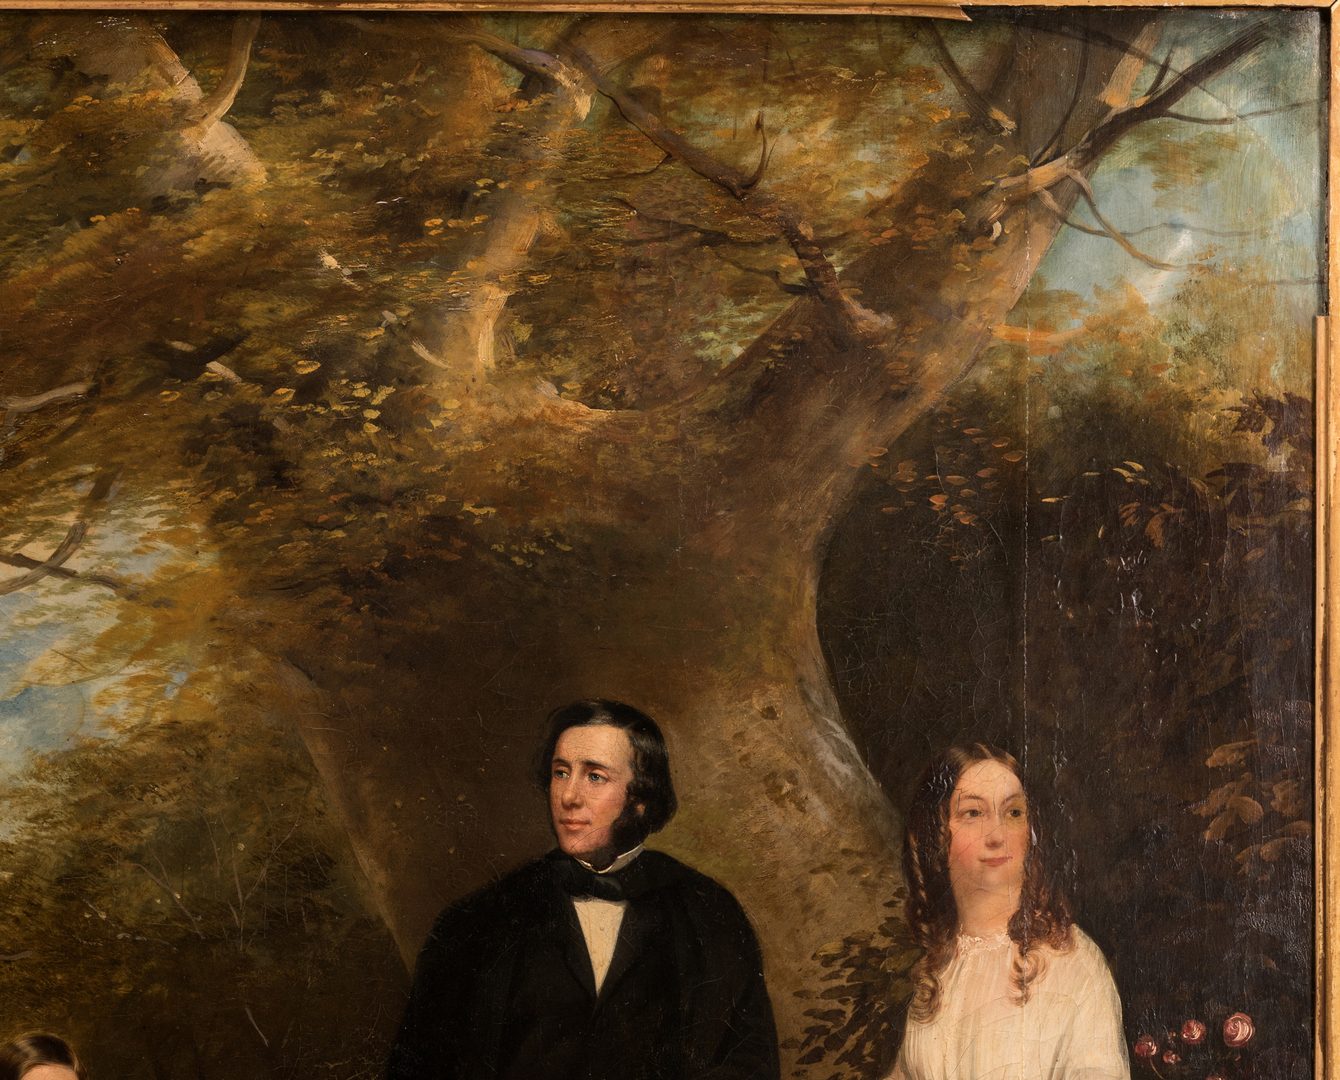 Lot 105: Portrait of a Family with Dog and Pony, circa 1845